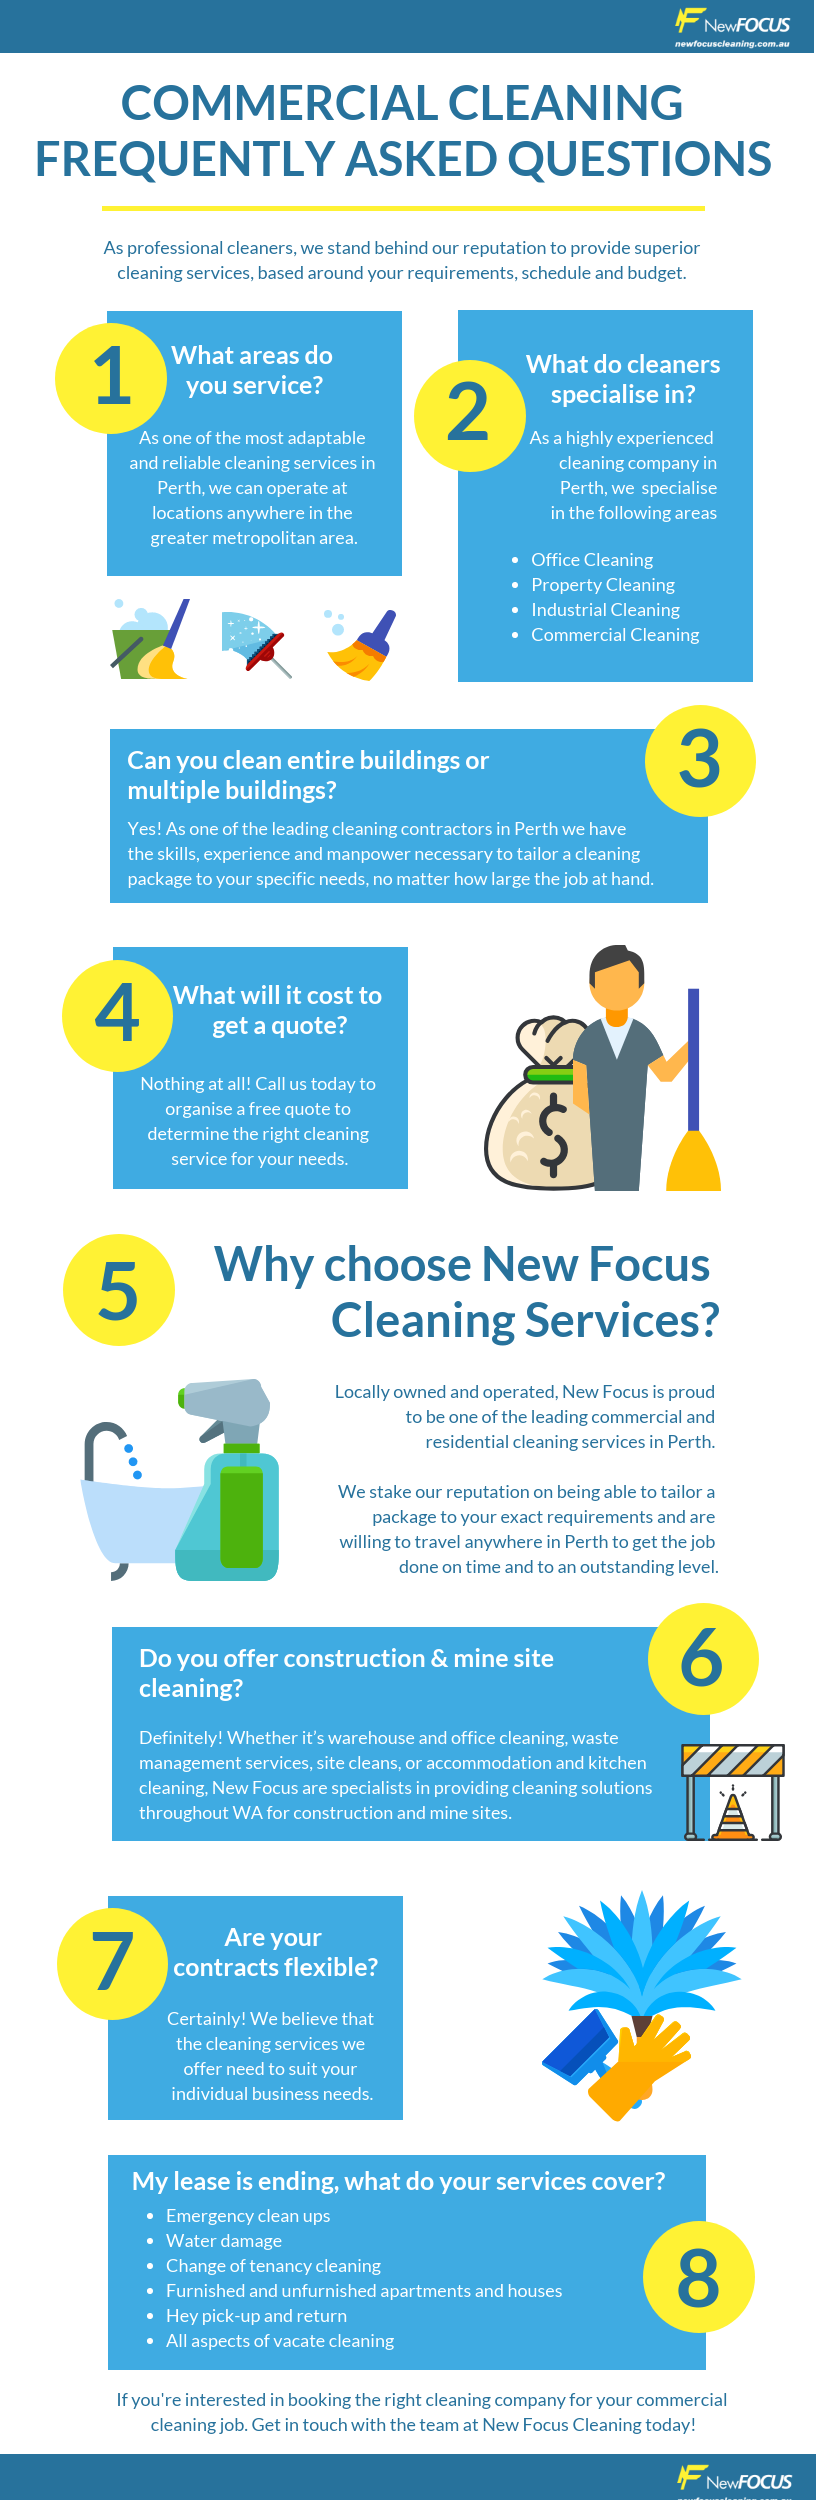 Commercial Cleaning Frequently Asked Questions